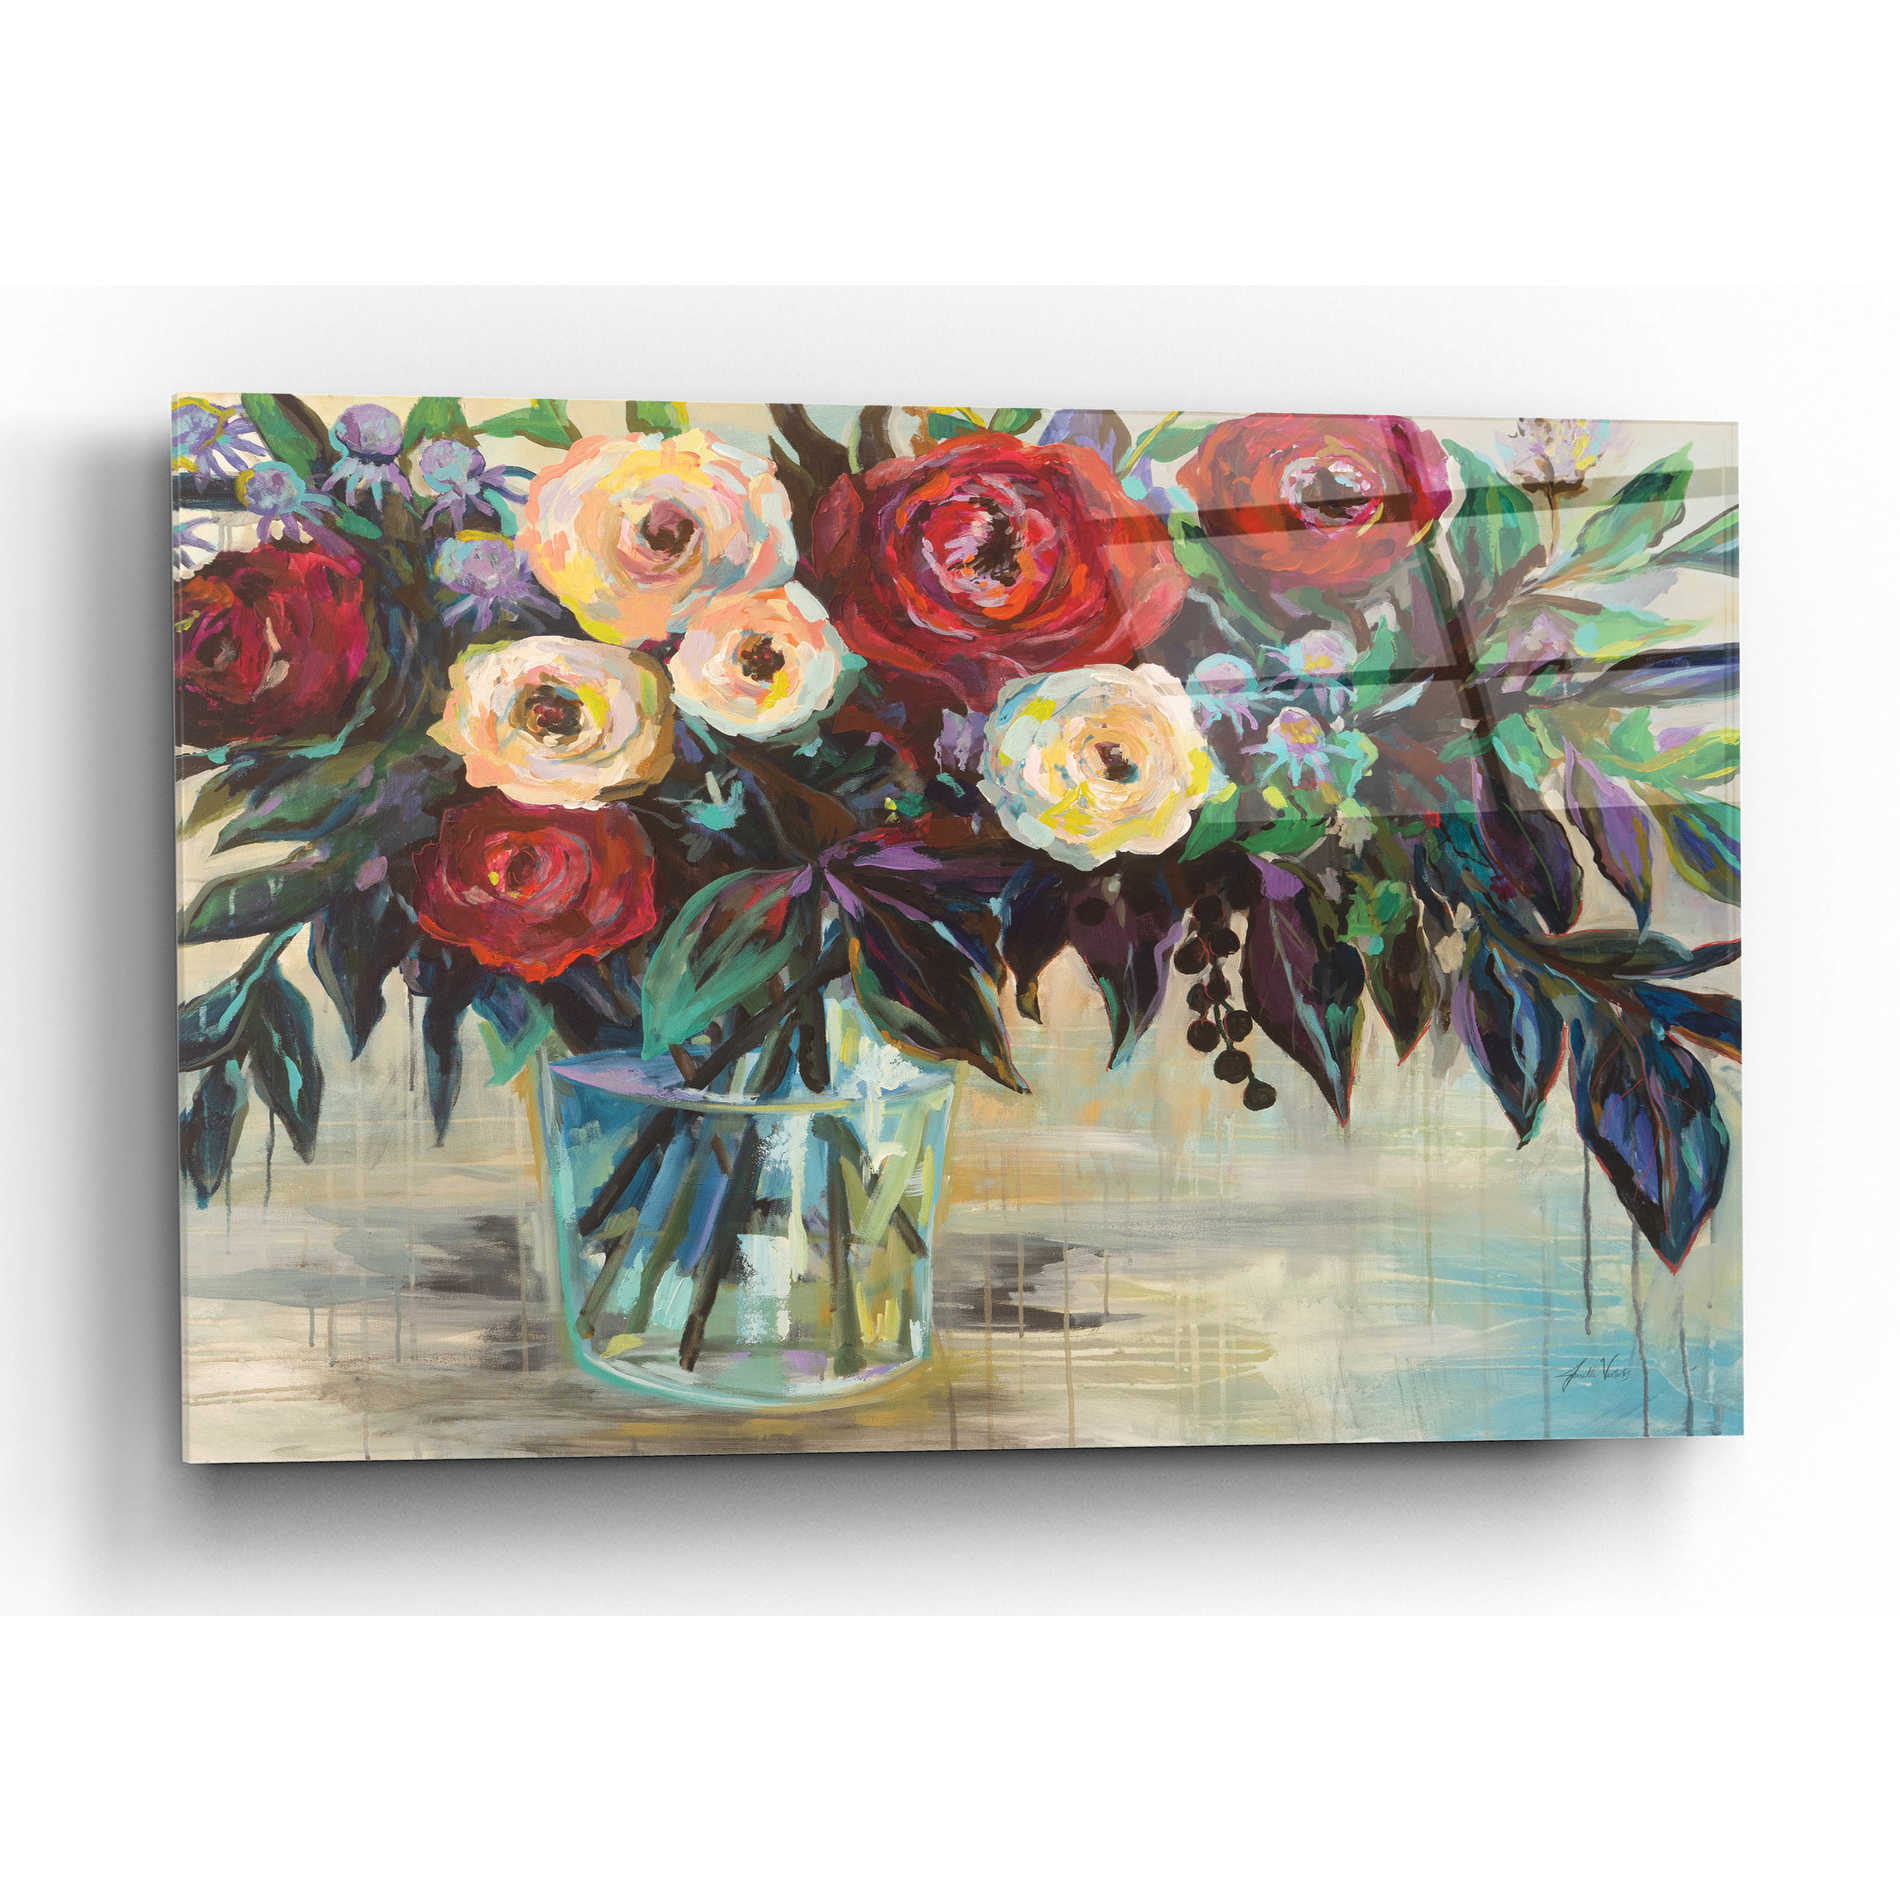 Epic Art 'Winter Floral Crop' by Jeanette Vertentes, Acrylic Glass Wall Art